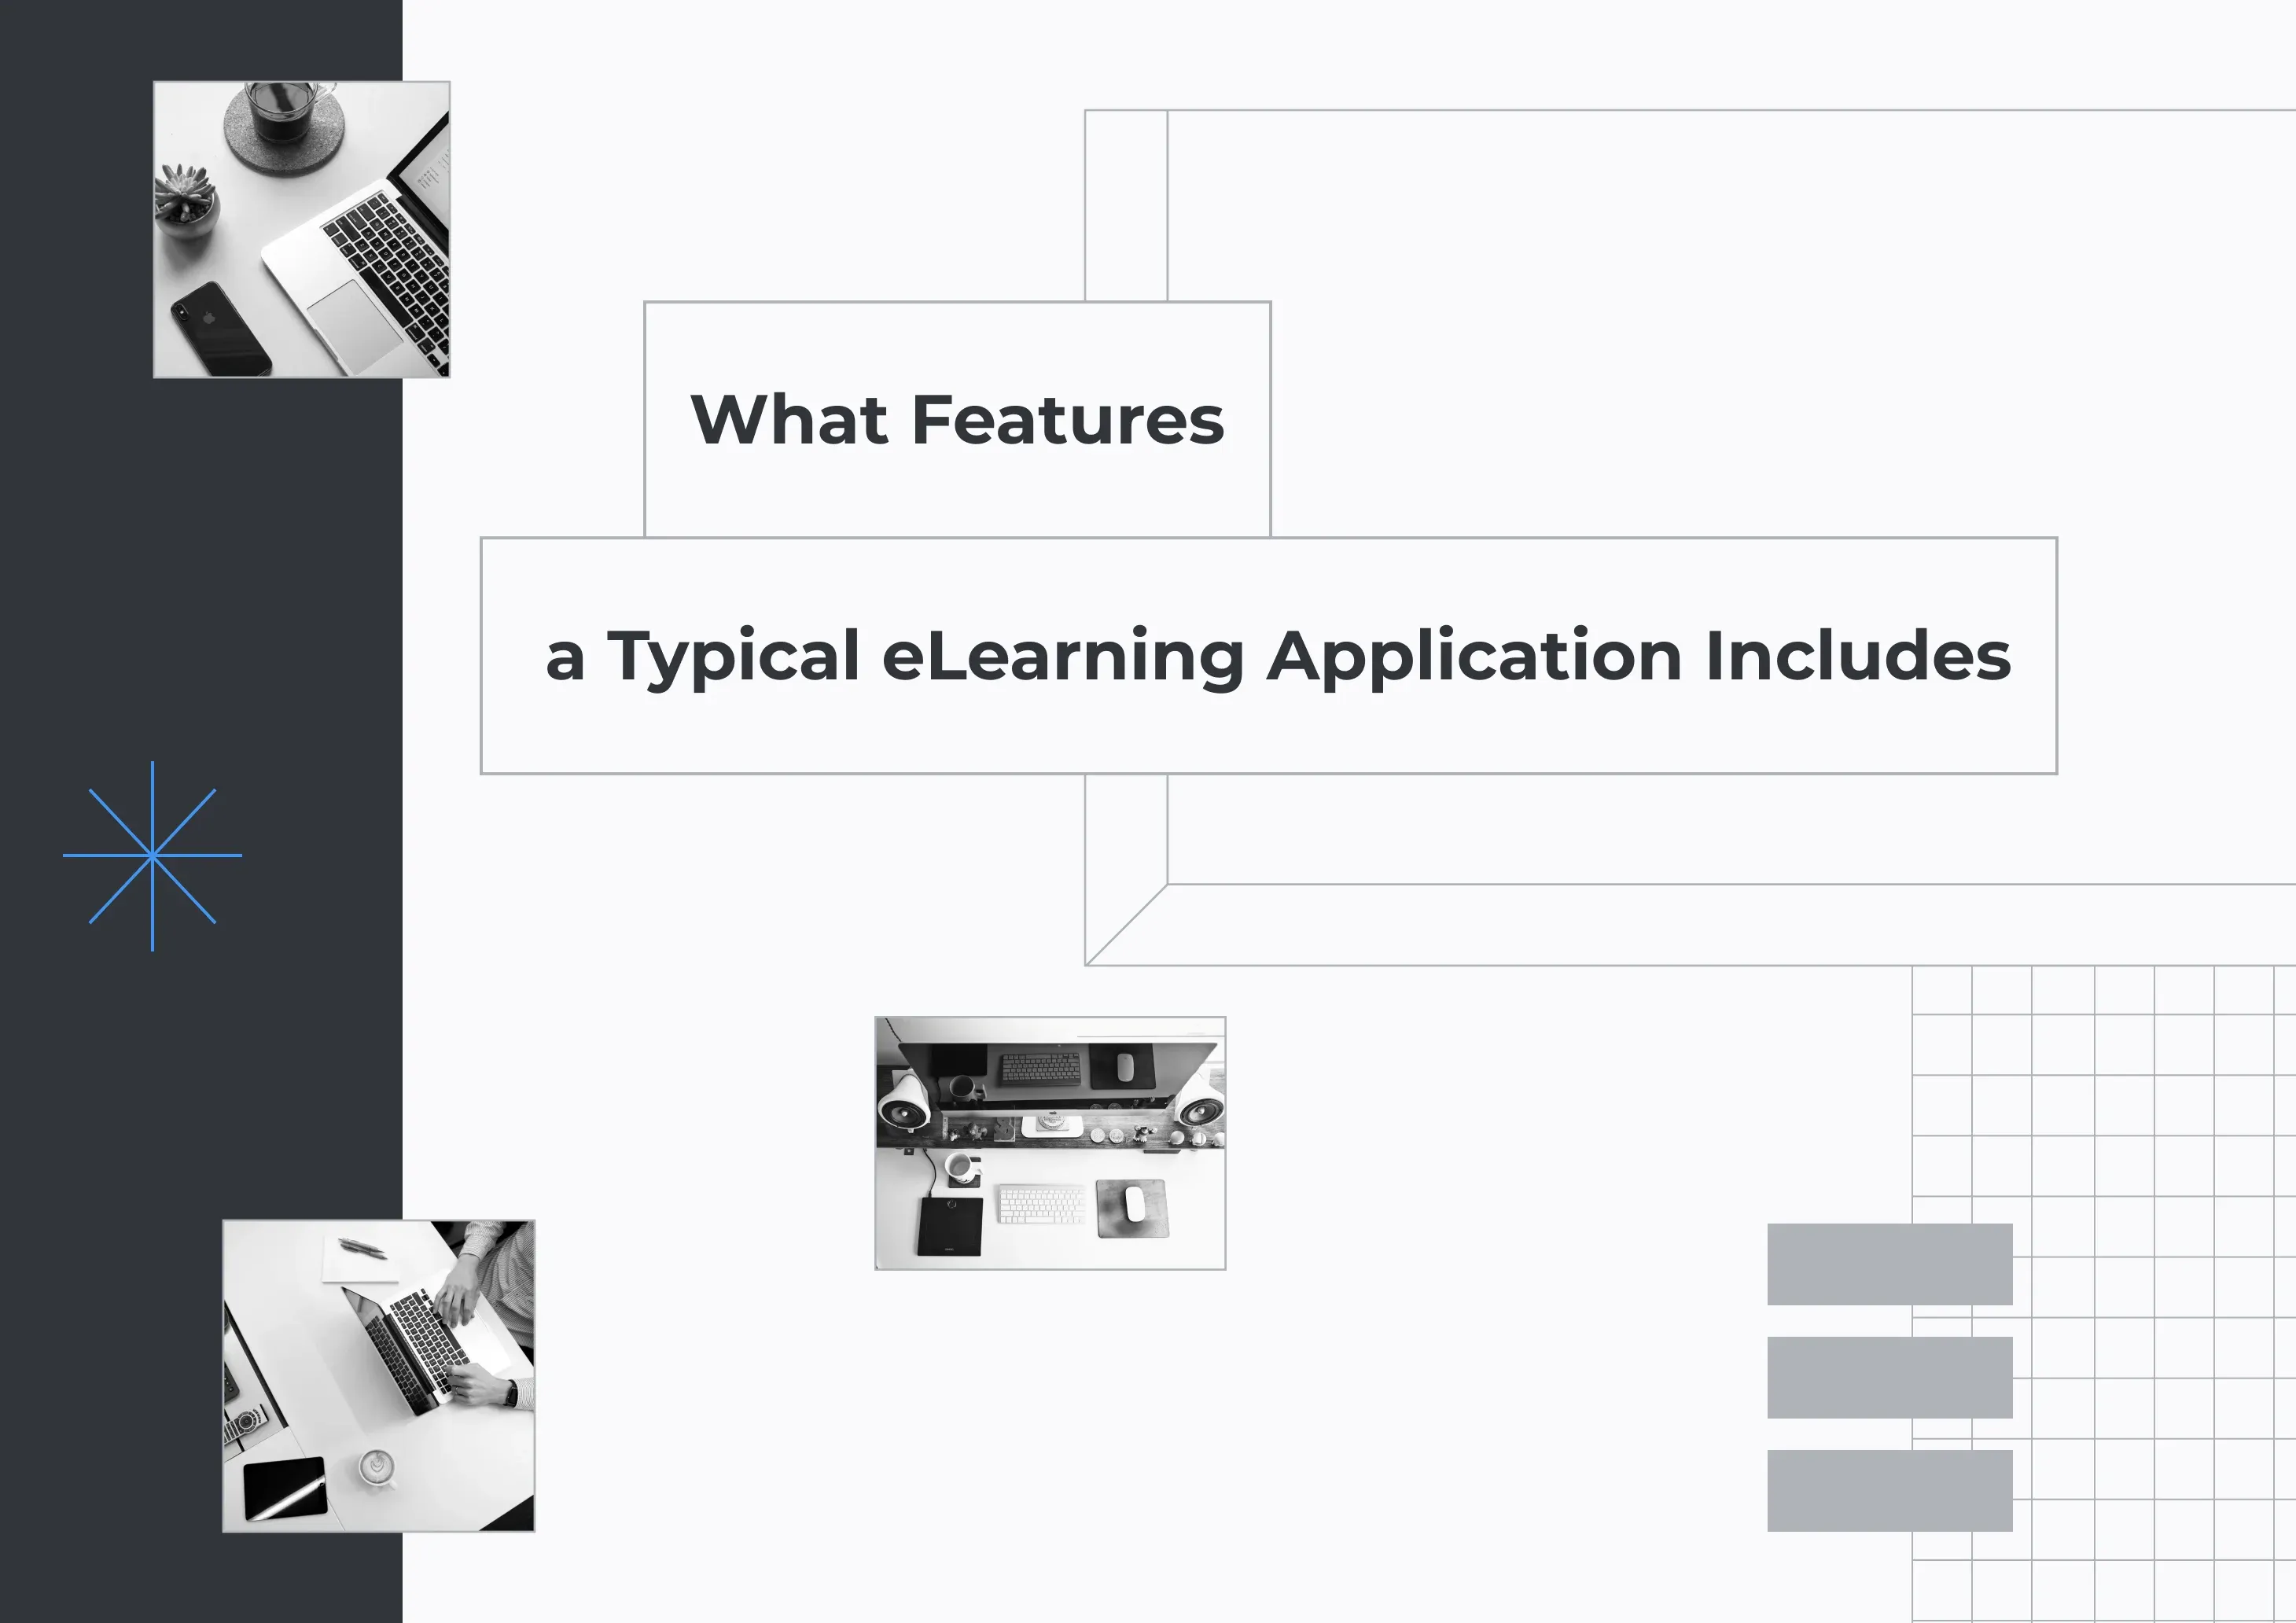 What Features a Typical eLearning Application Includes